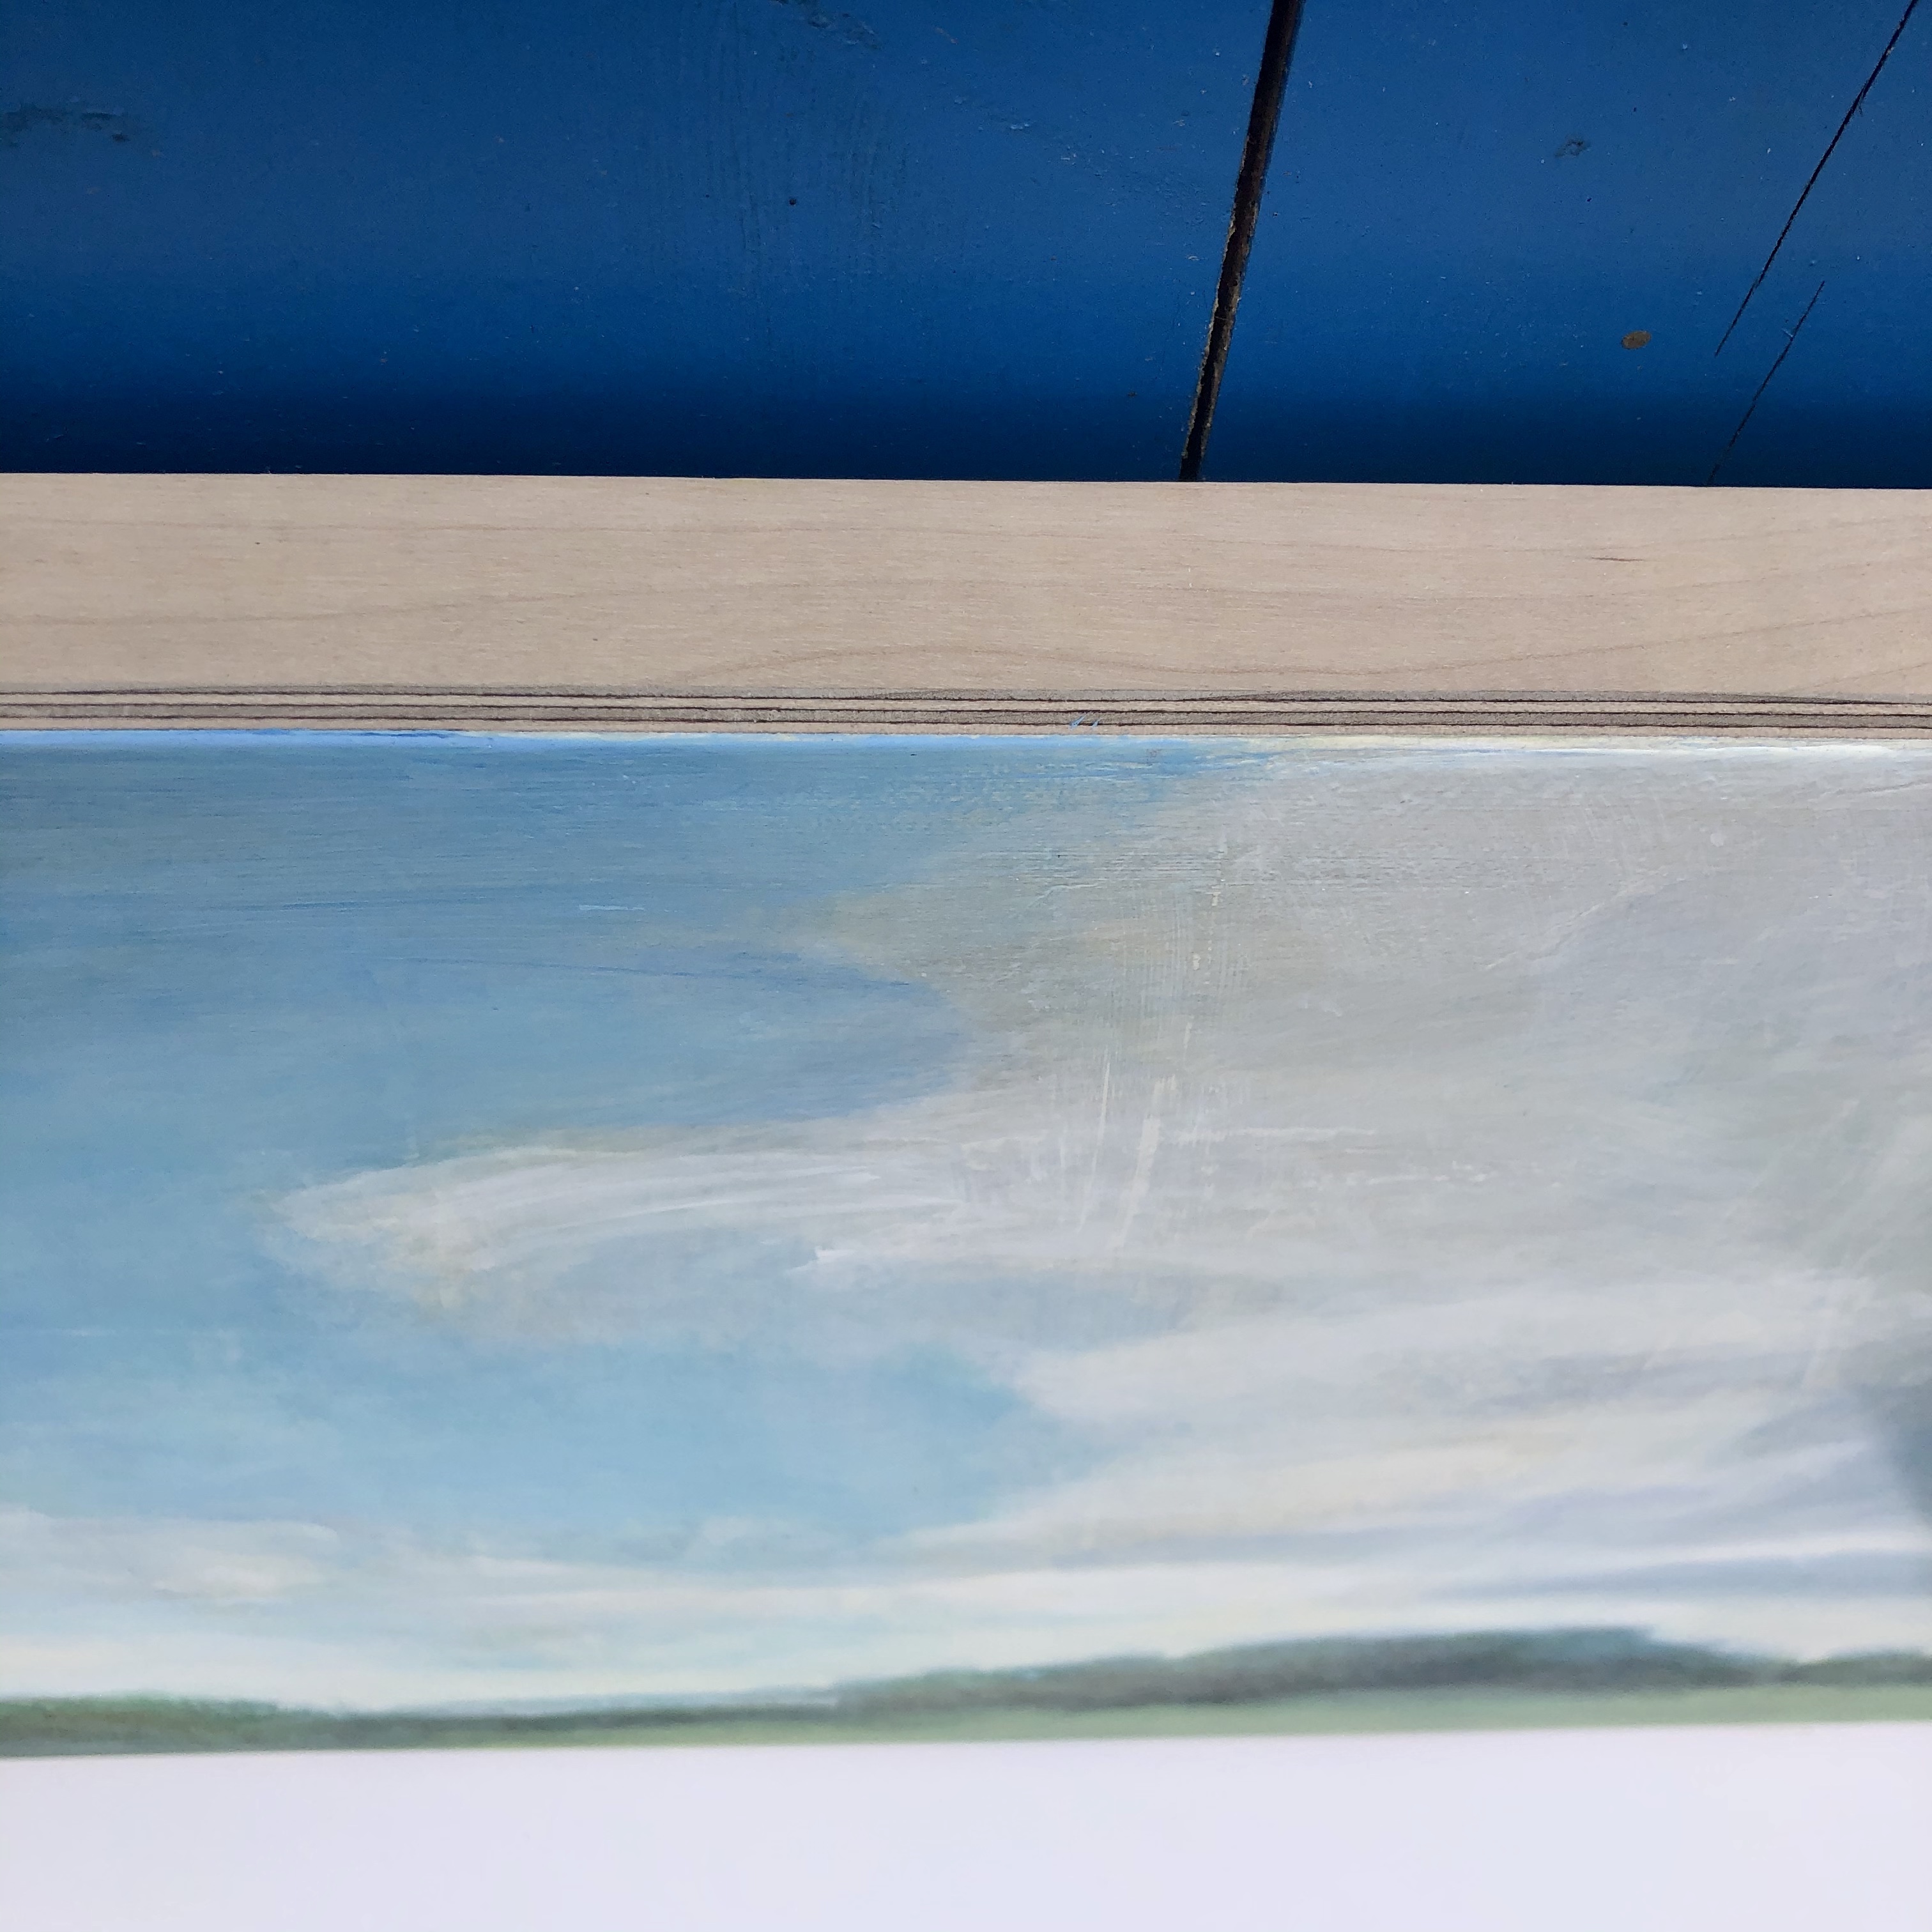 edge of painting showing bare wood